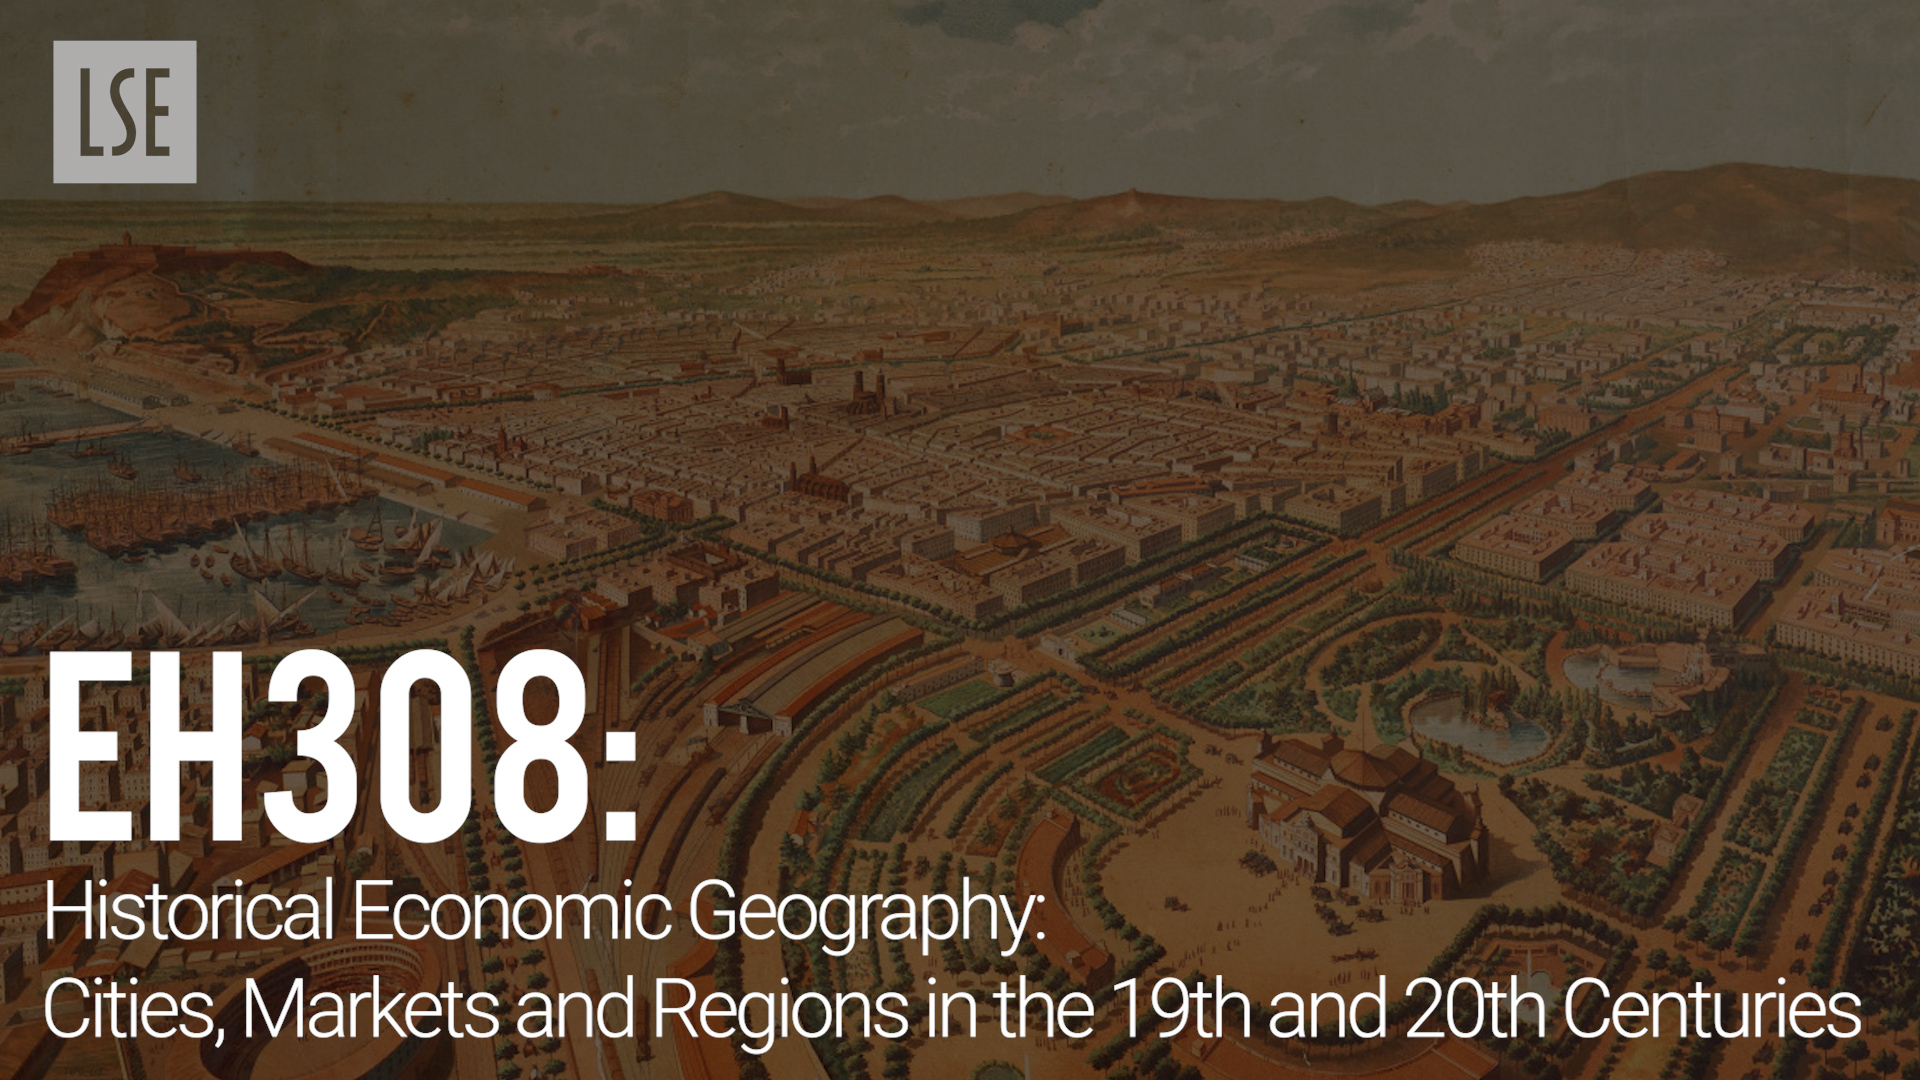 EH308 - Historical Economic Geography: Cities, Markets and Regions in the 19th and 20th Centuries, by Professor Joan Roses